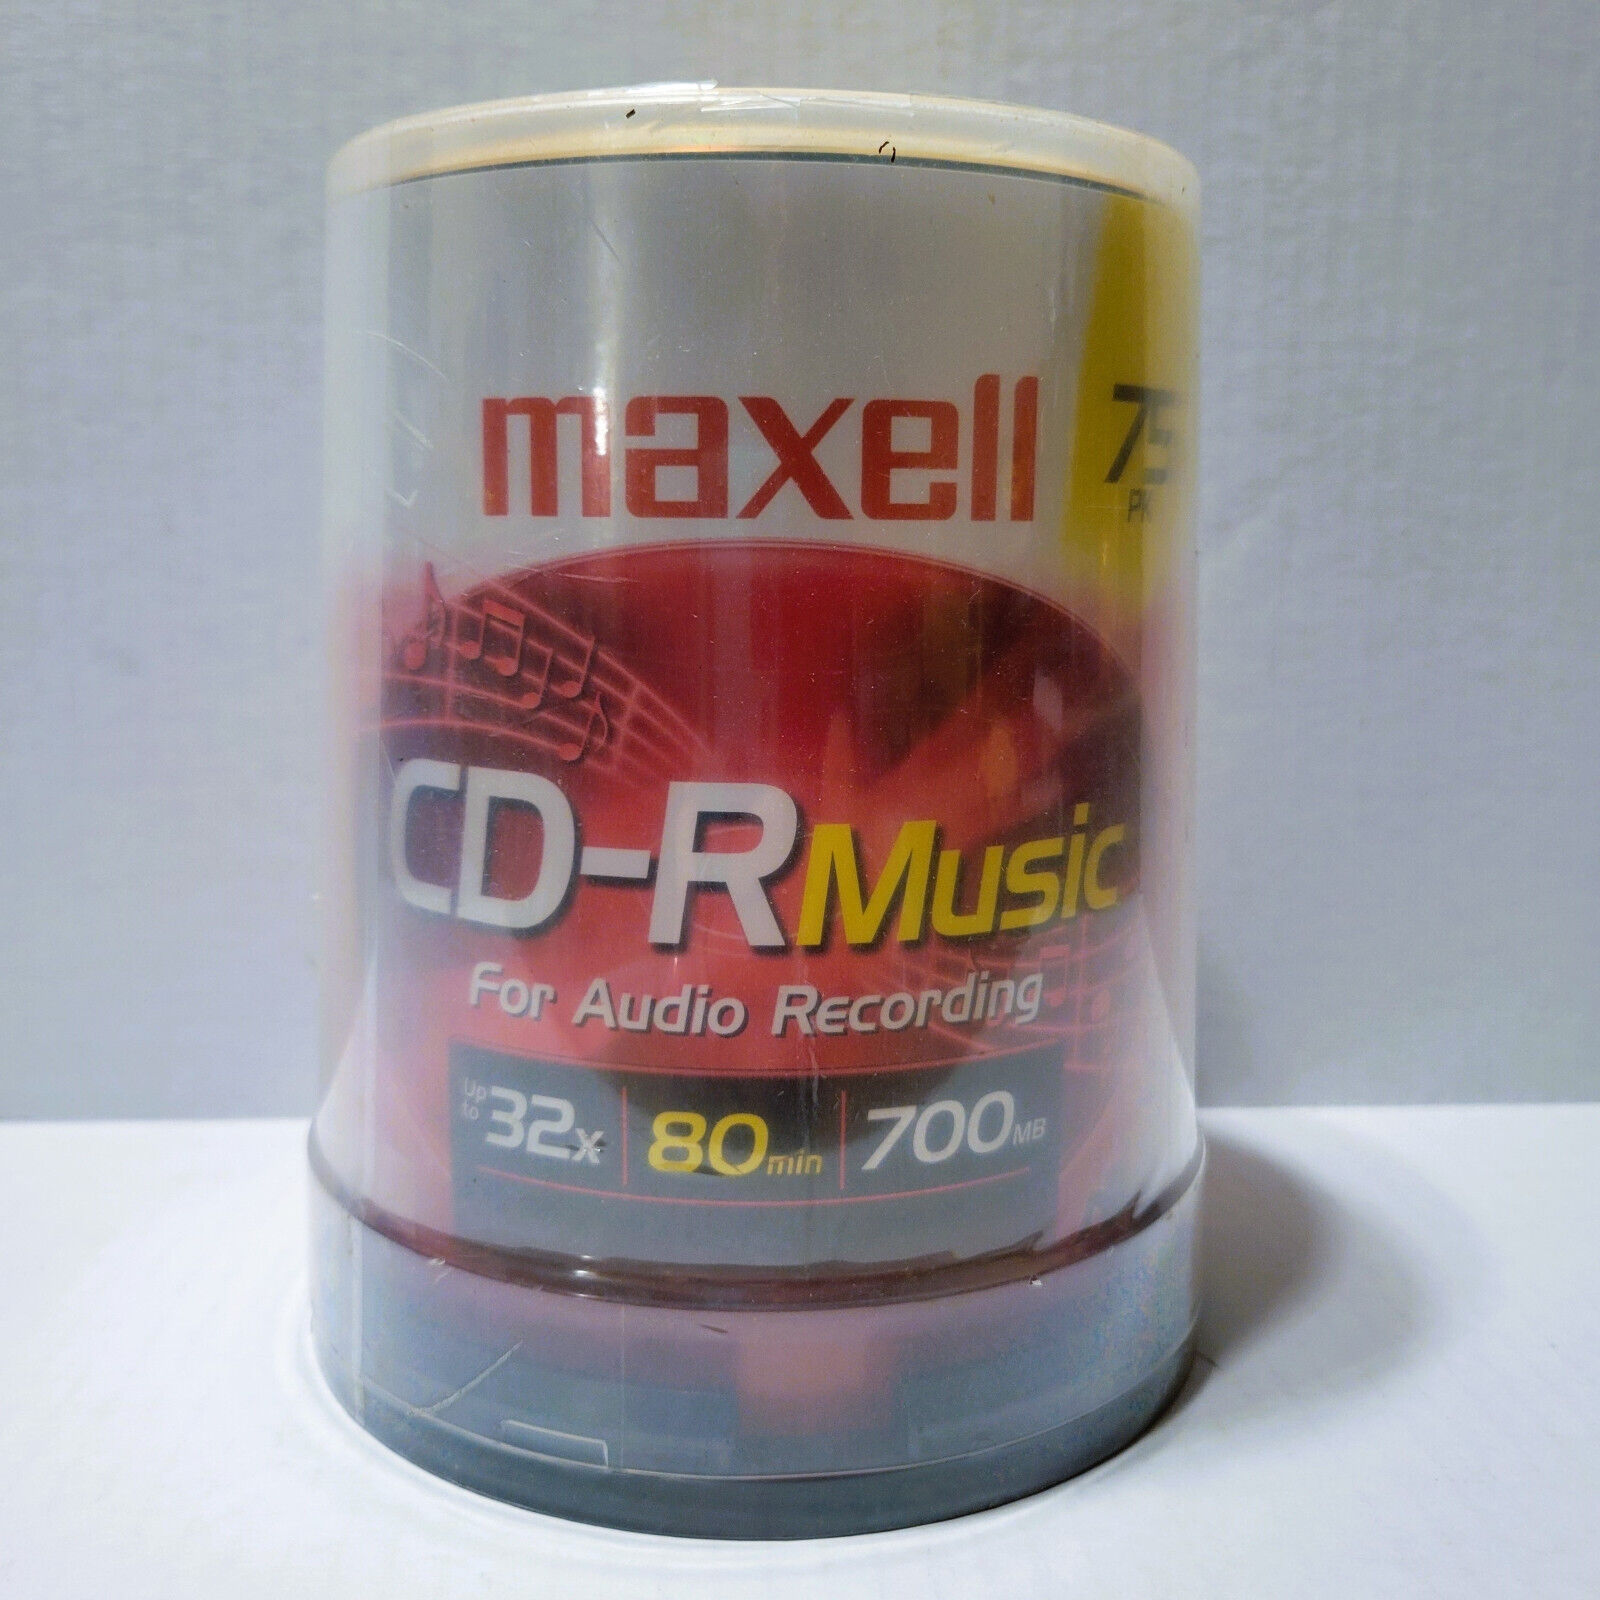 Maxell CD-R Music Gold Blank 75 Discs 80 min 700MB Sealed NEW